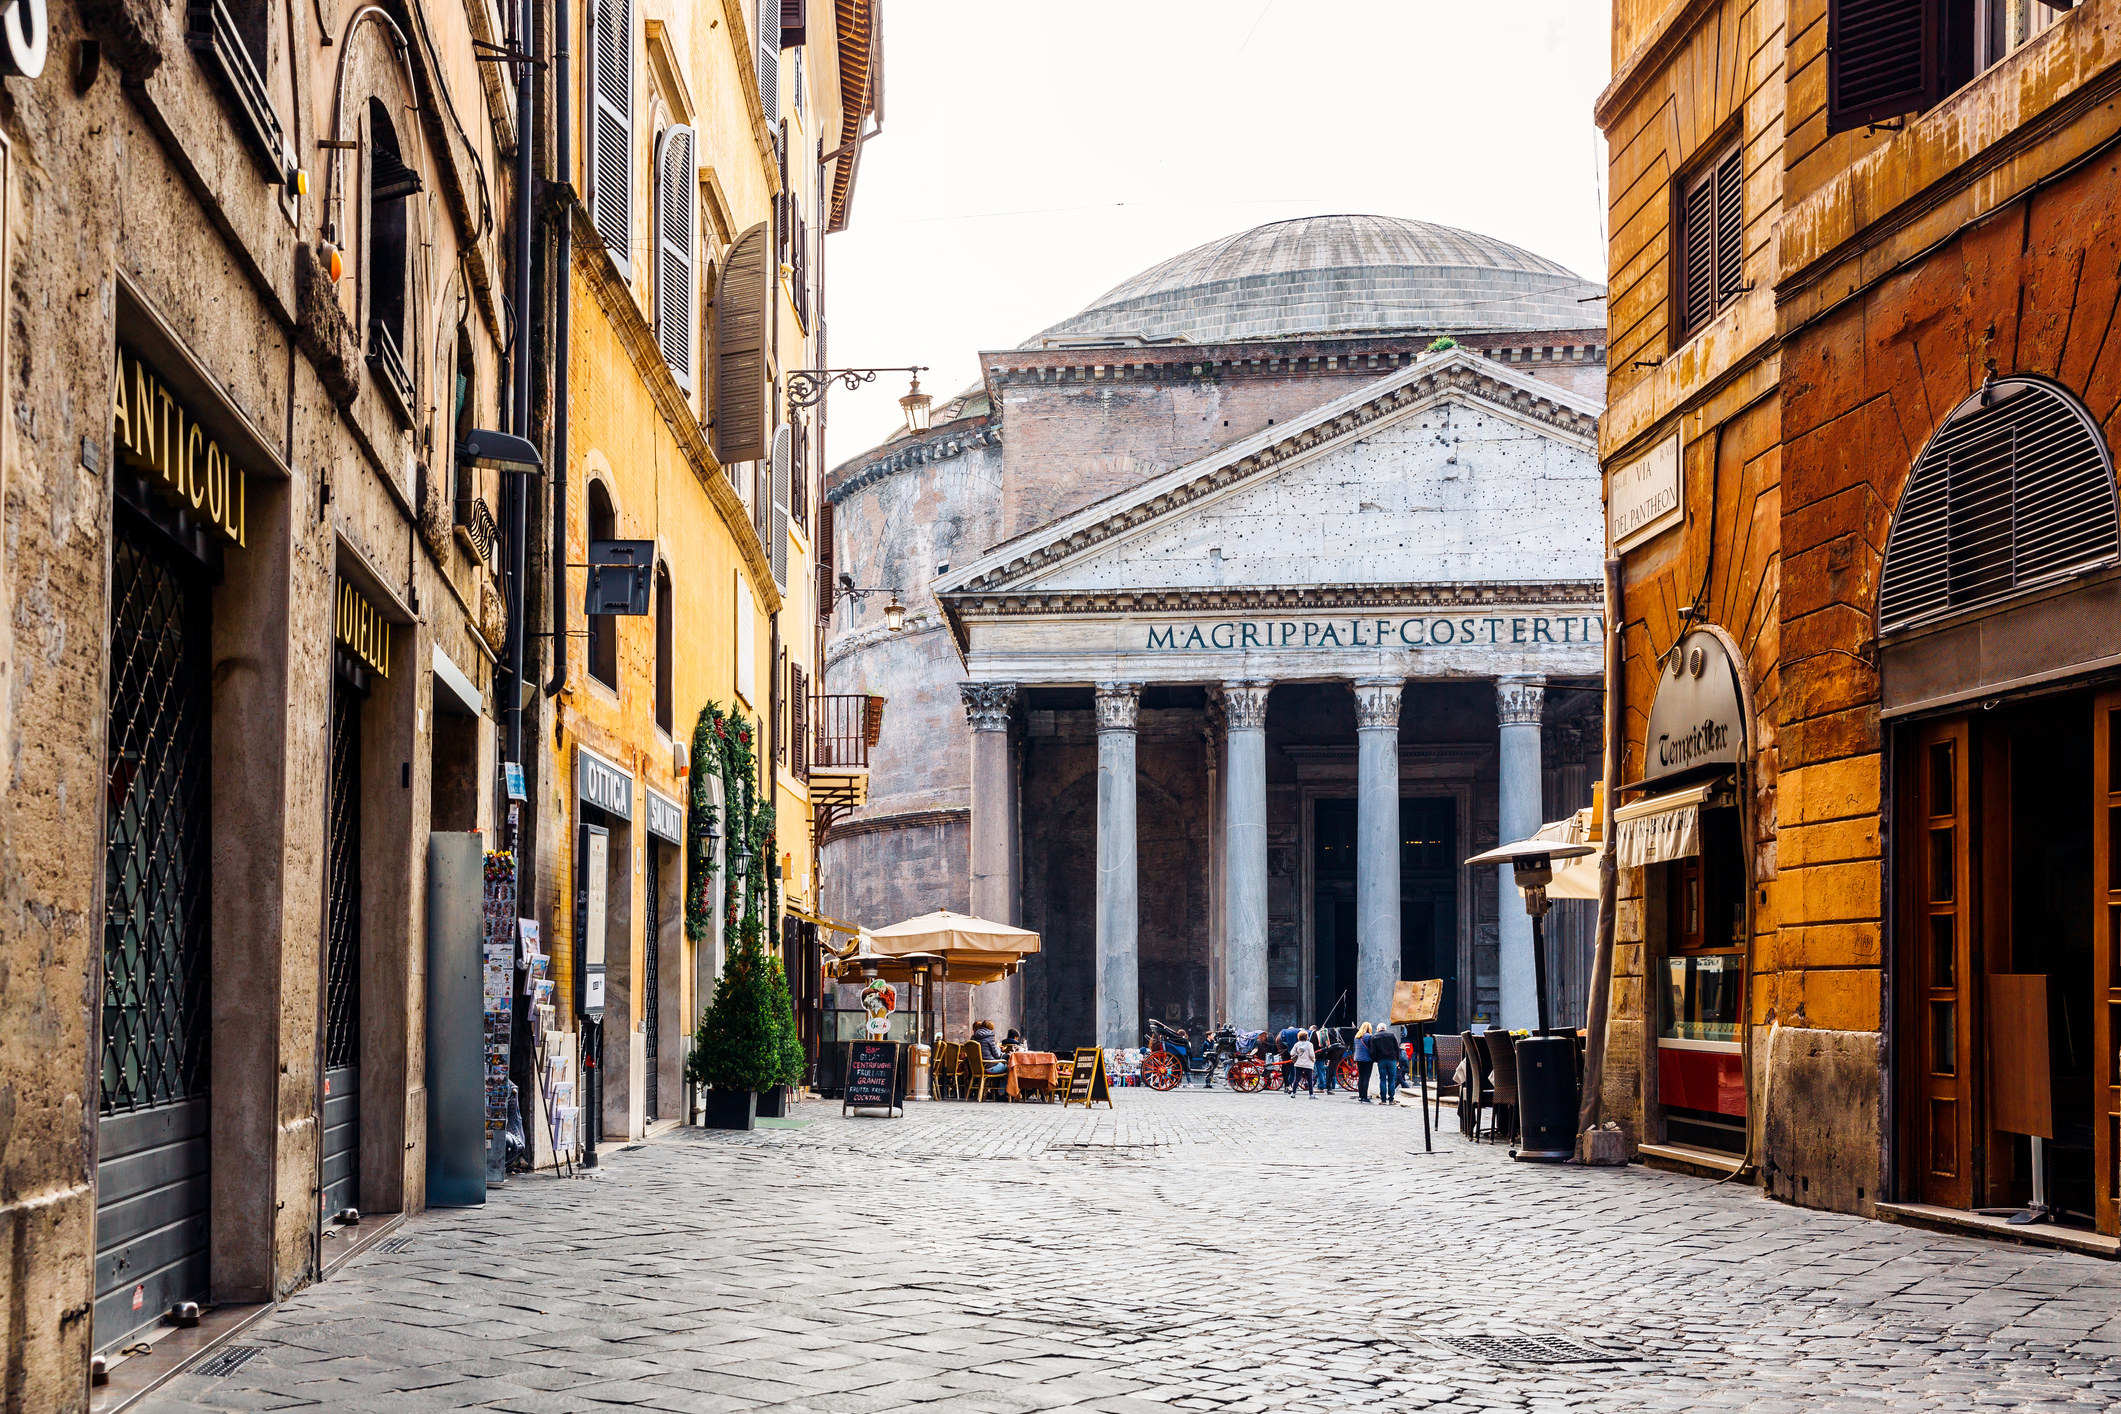 Old cobblestone street in Rome with the Pantheon in the center